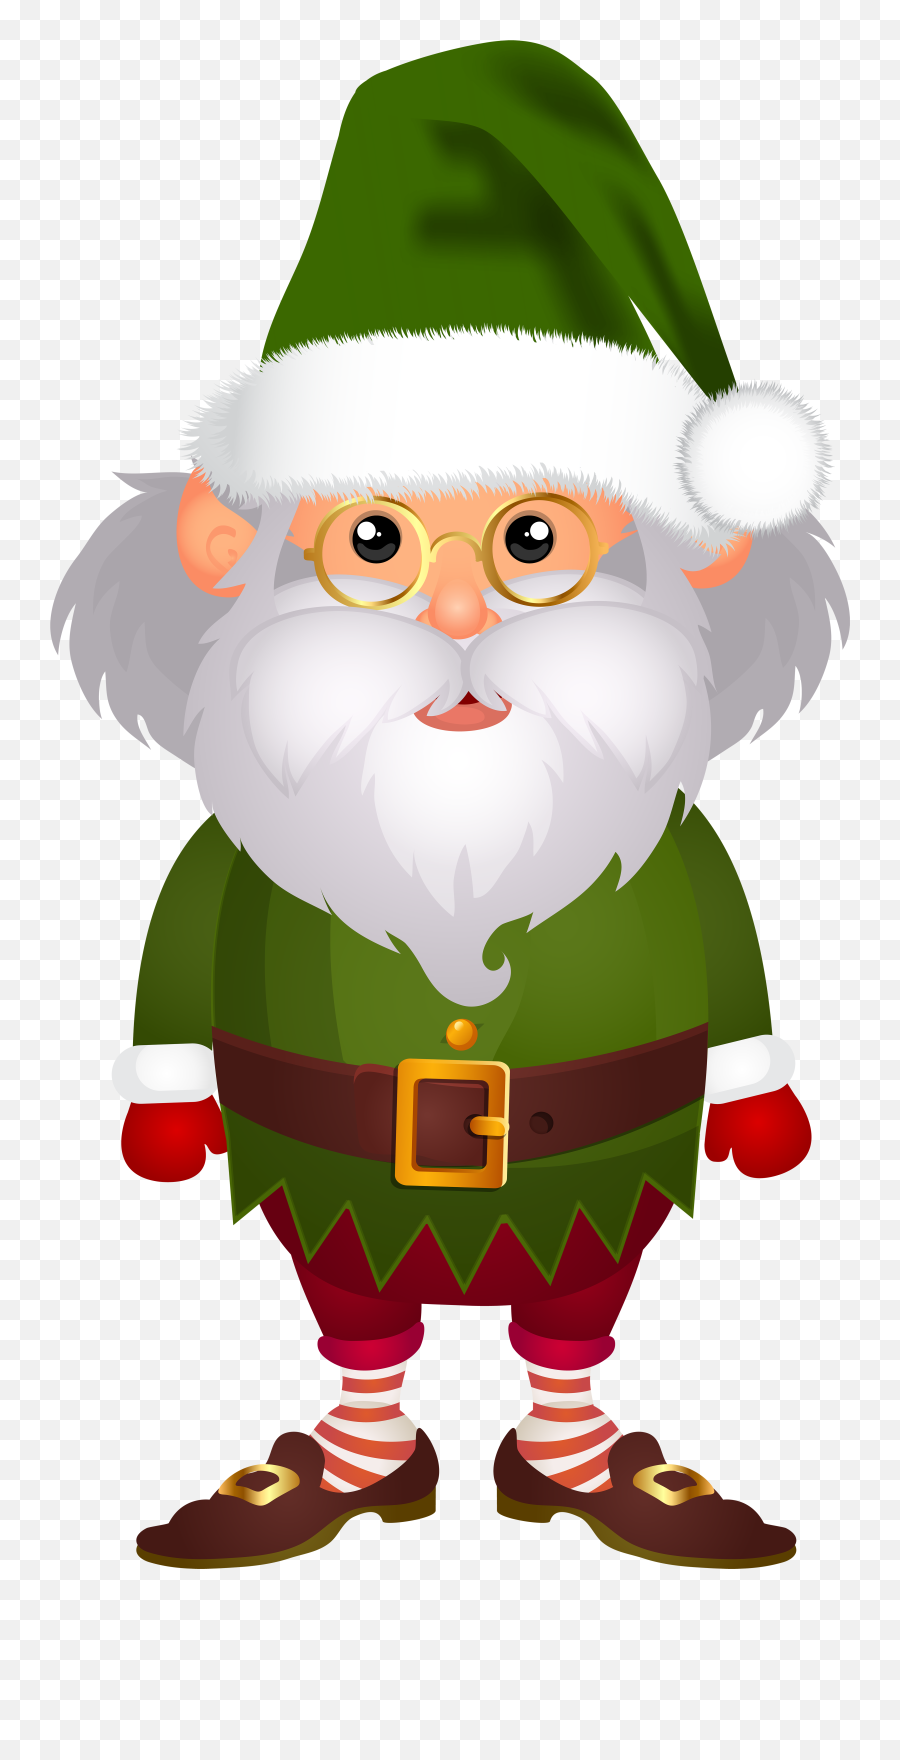 Library Of Free Christmas Elf Freeuse Png Files - Green Santa Claus Transparent,Elf On The Shelf Png